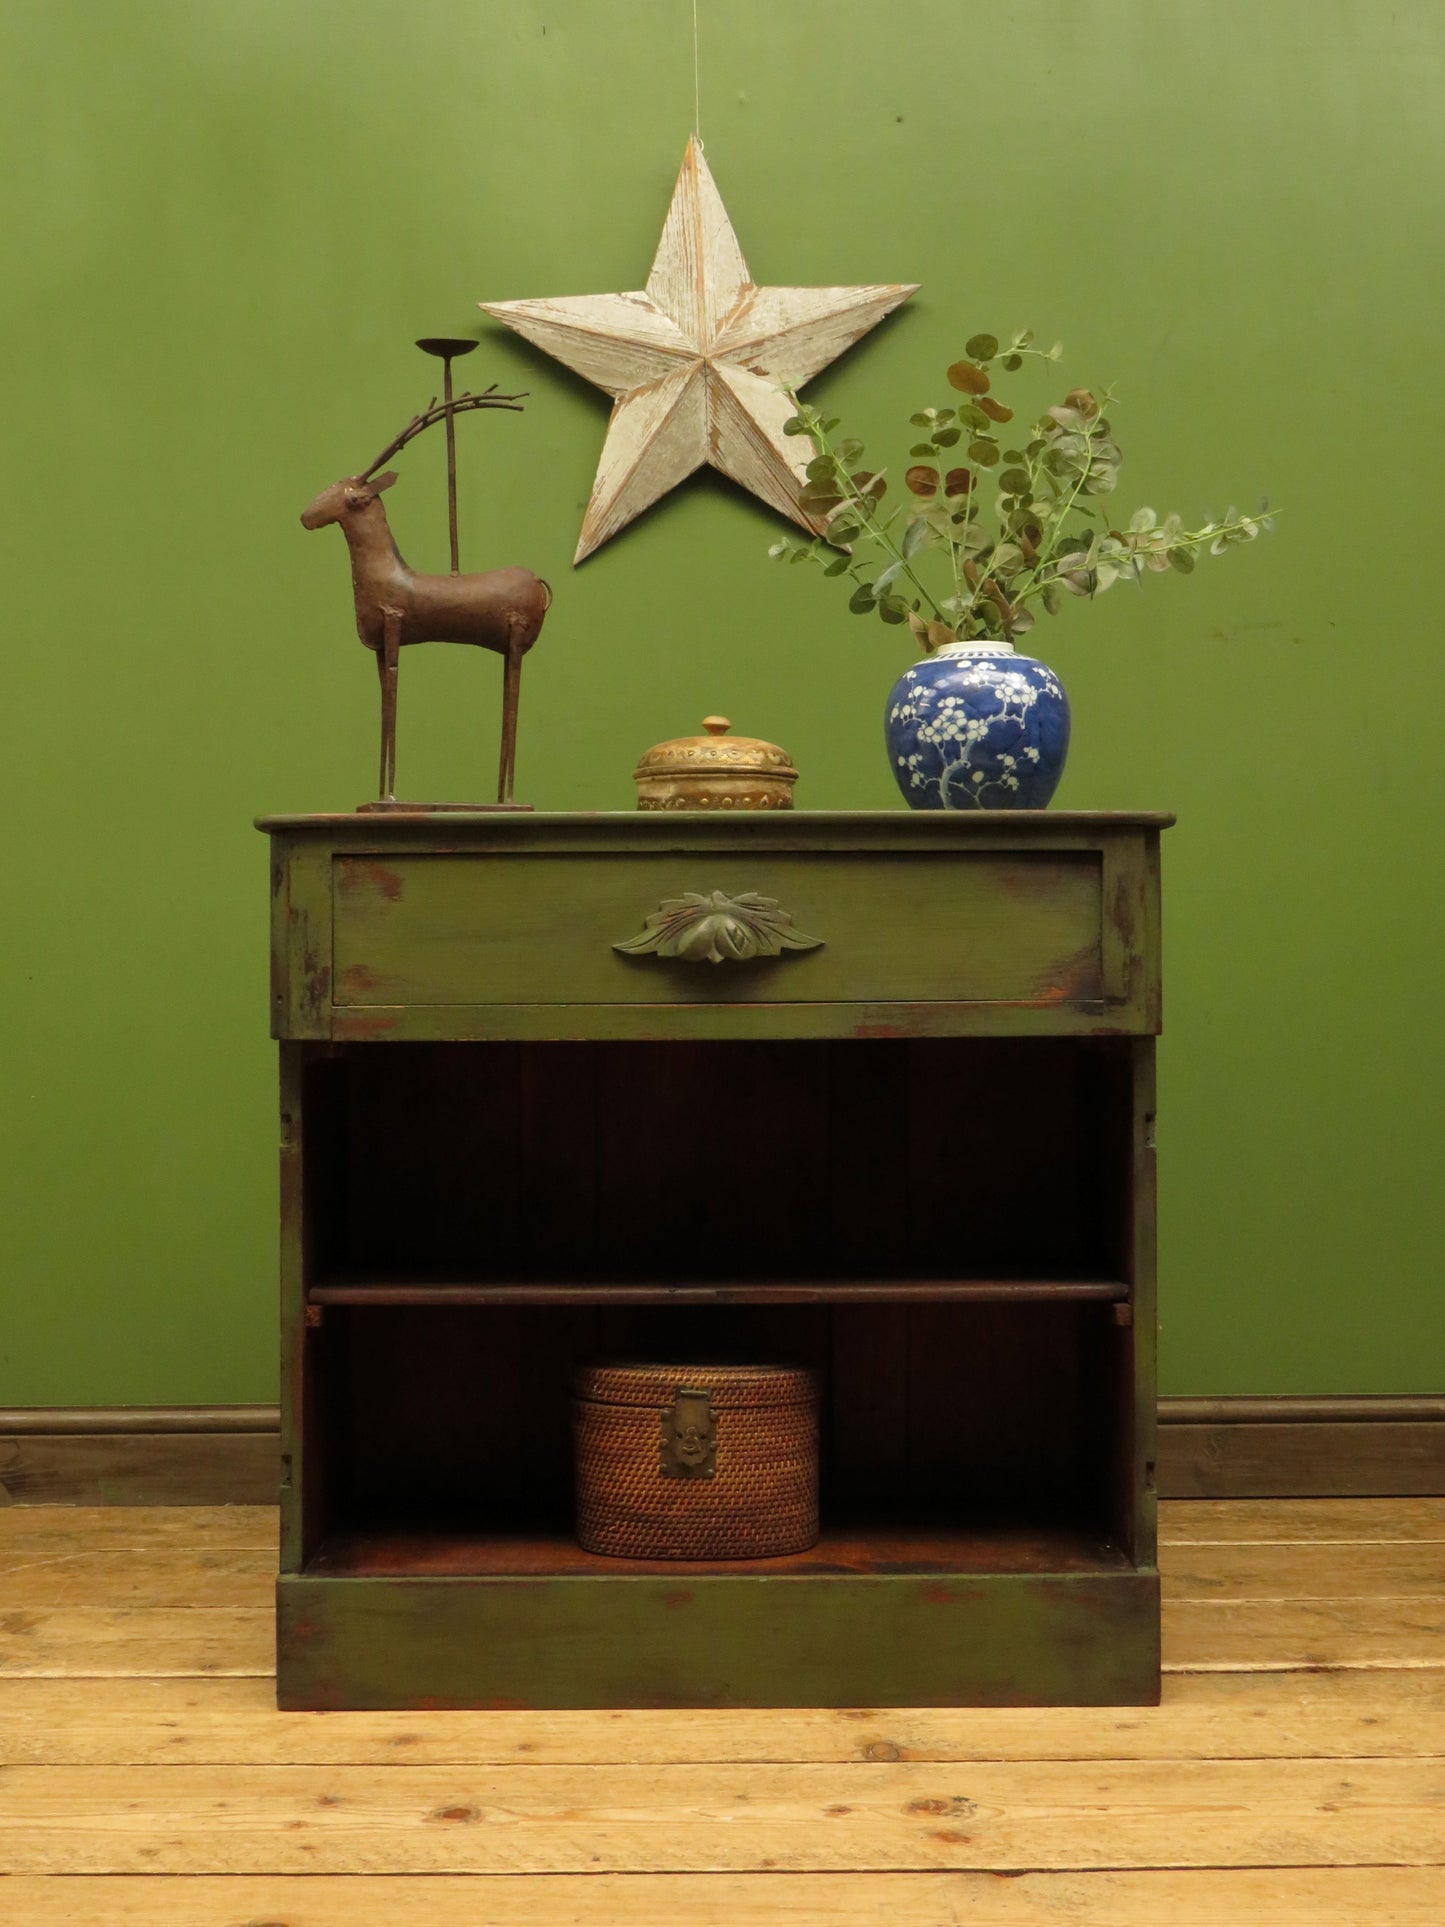 Bohemian Green Painted Cabinet with Drawer